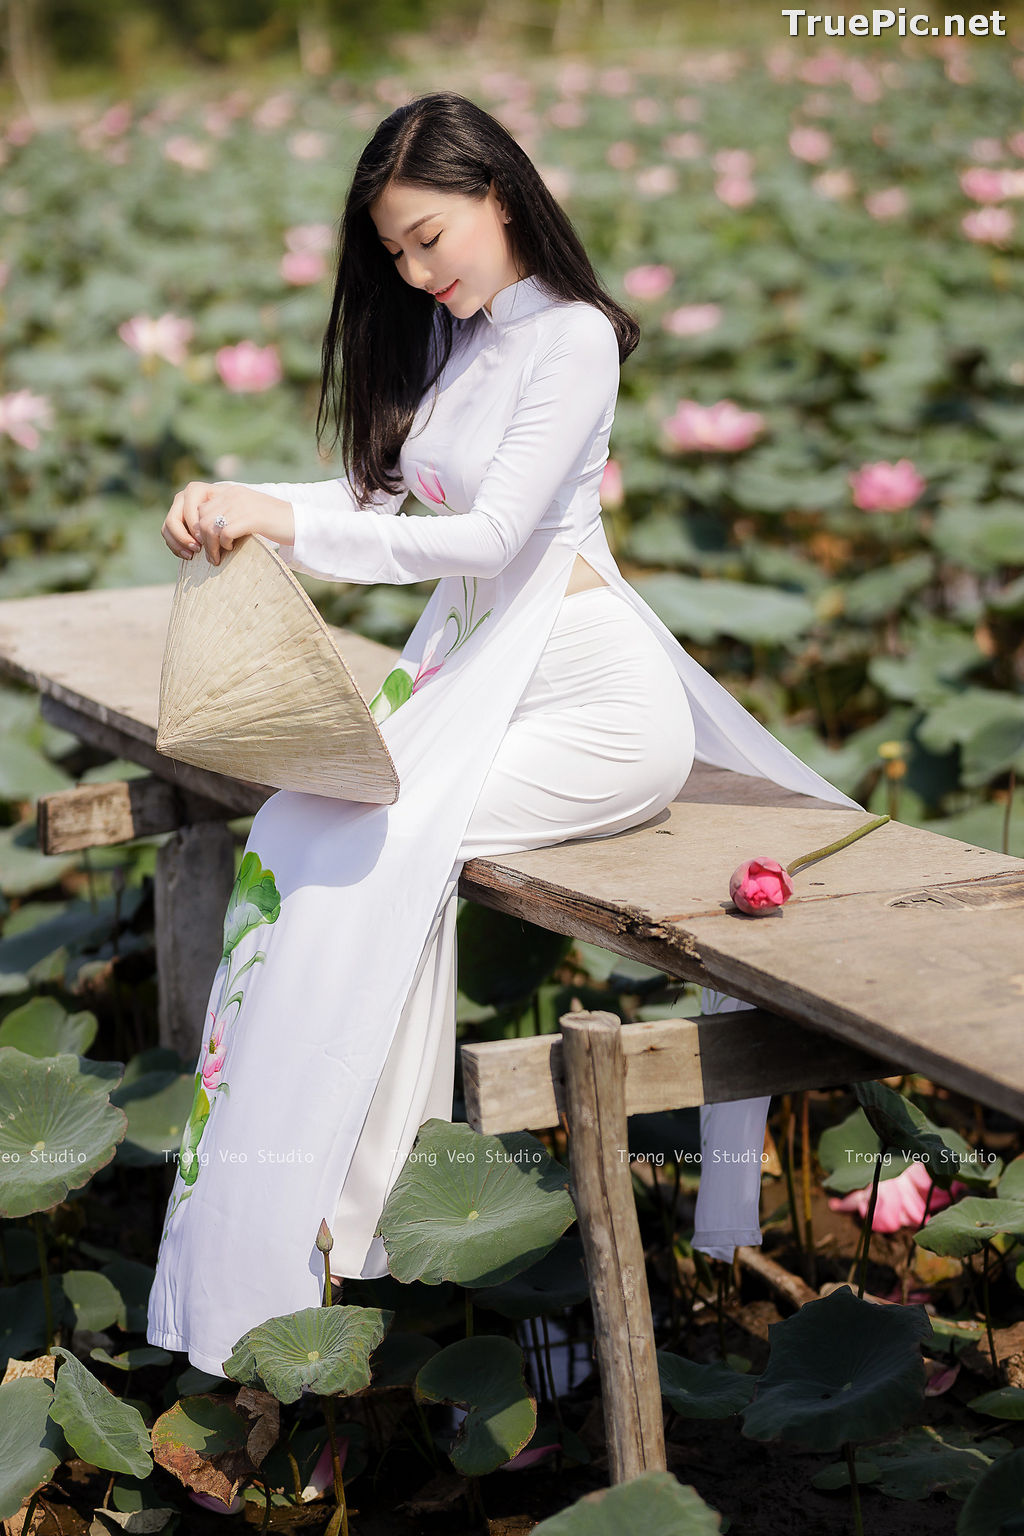 Image The Beauty of Vietnamese Girls with Traditional Dress (Ao Dai) #3 - TruePic.net - Picture-47